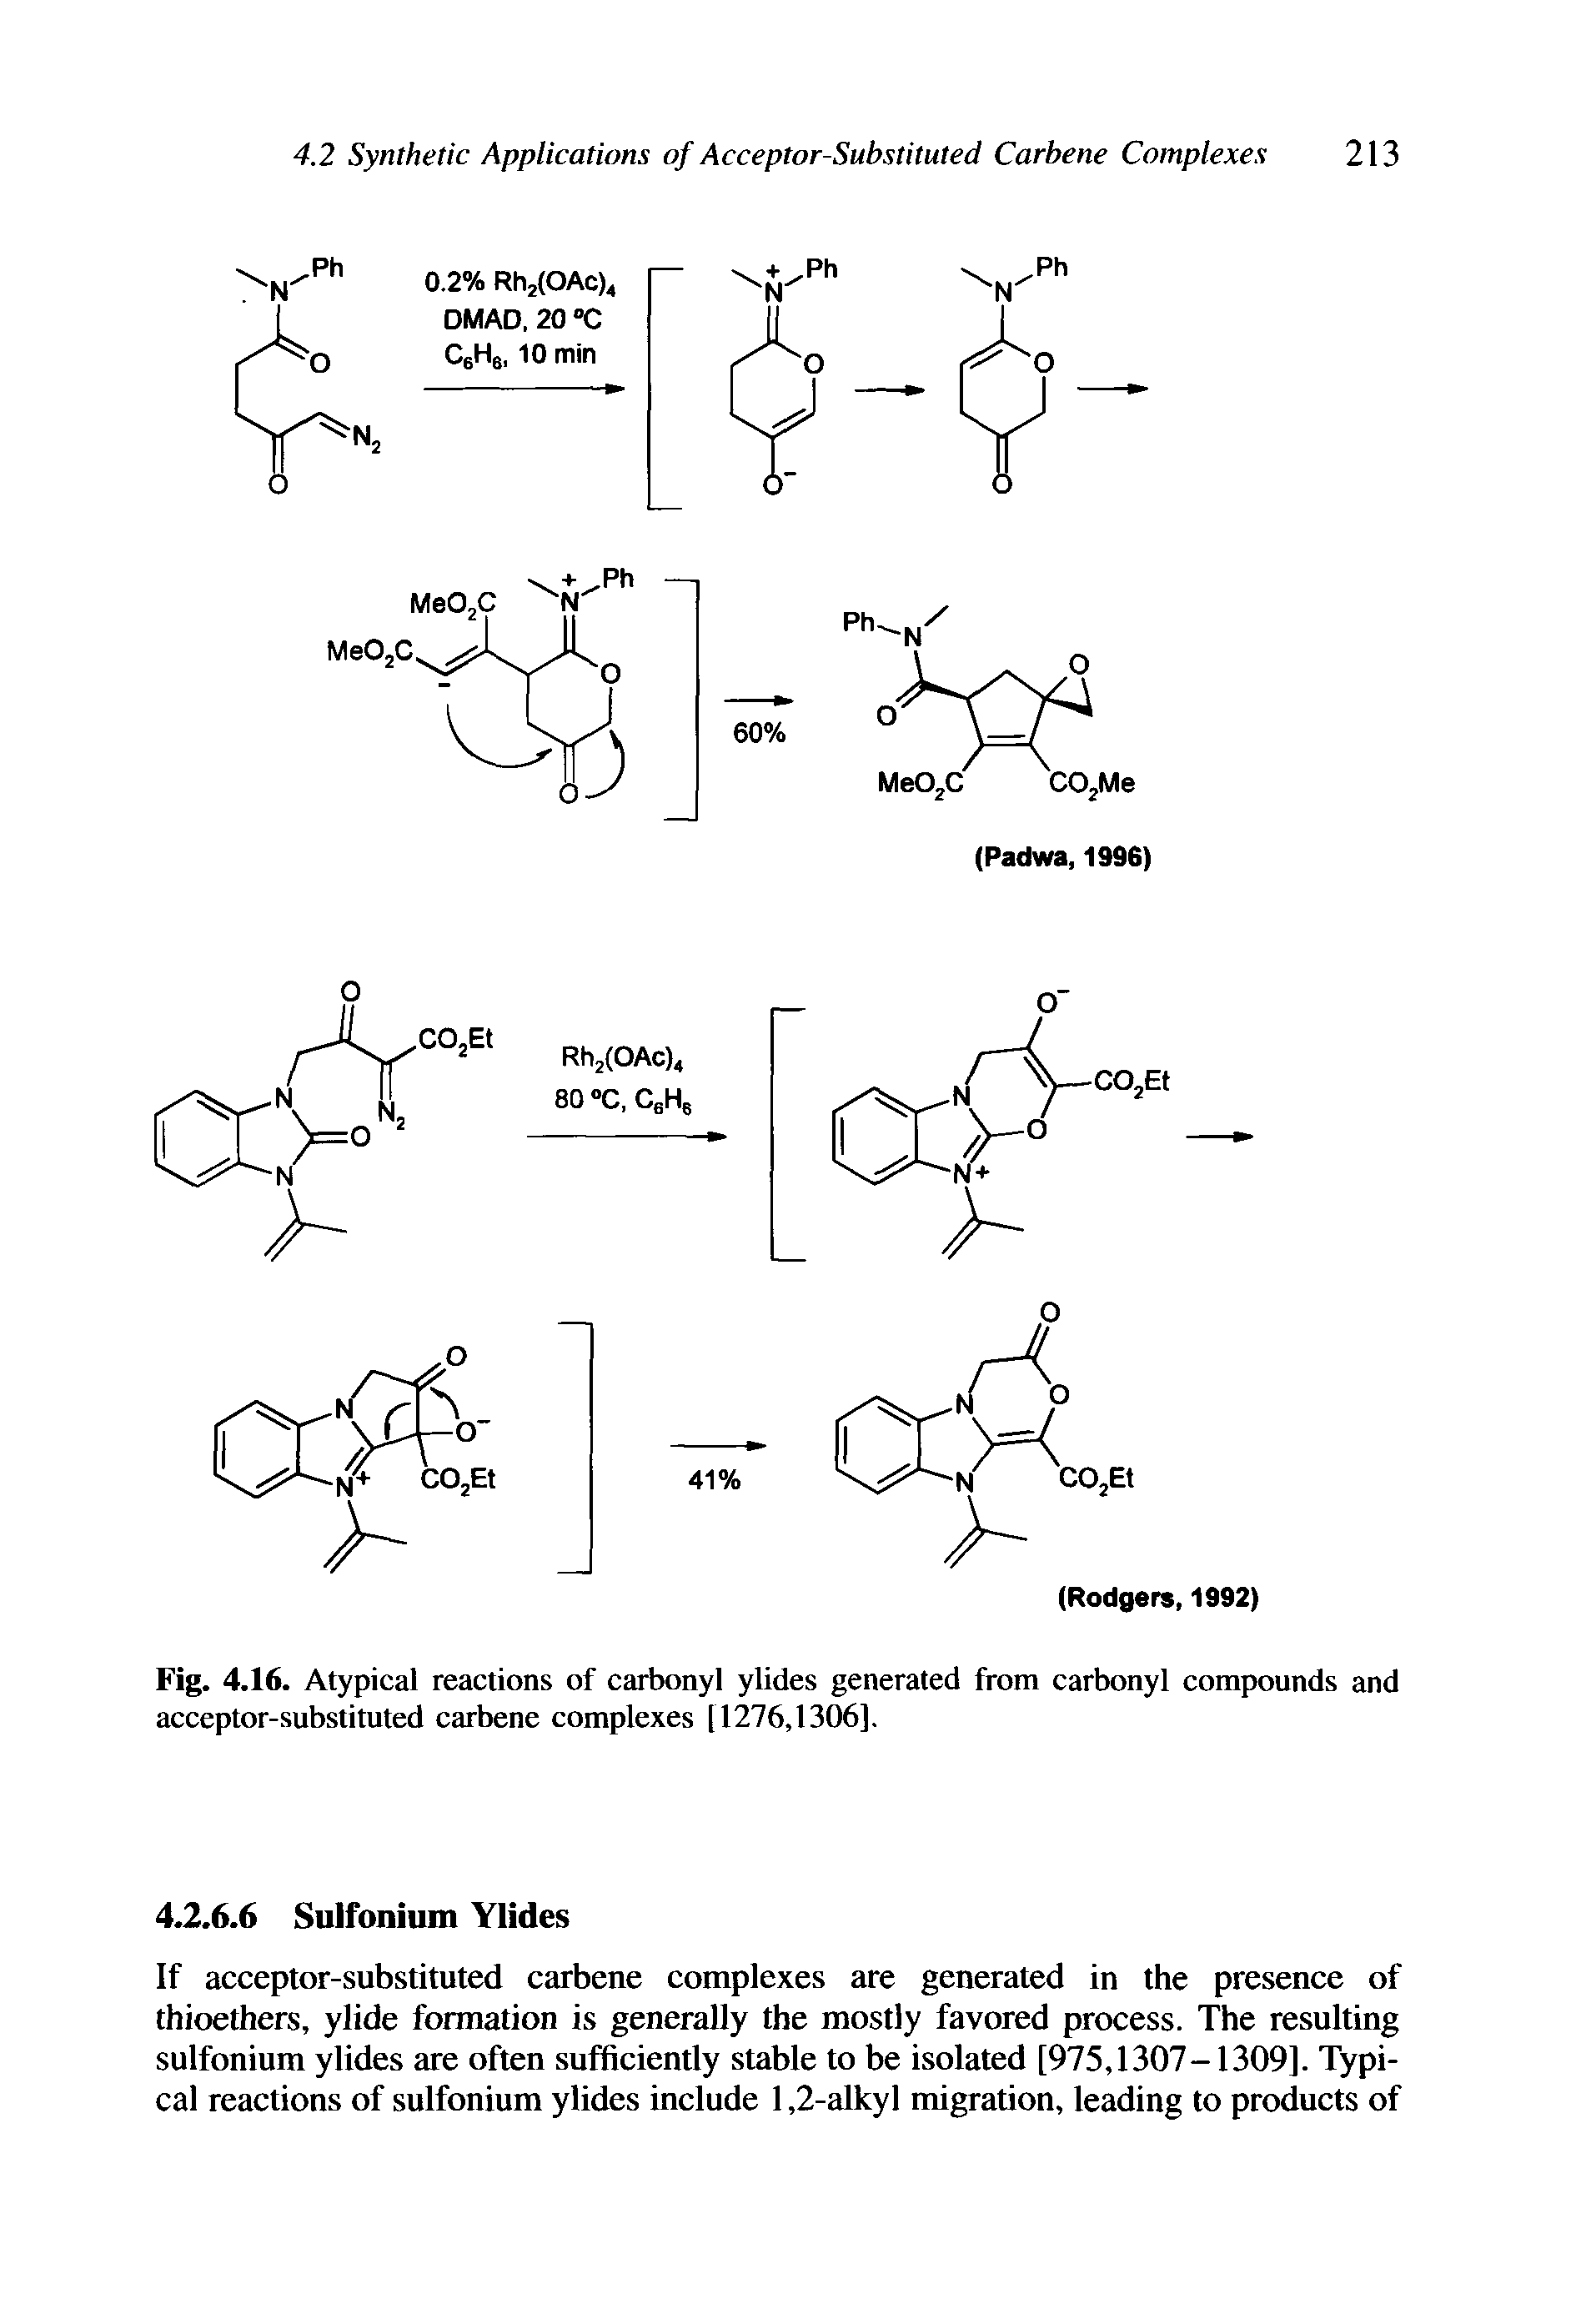 Fig. 4.16. Atypical reactions of carbonyl ylides generated from carbonyl compounds and acceptor-substituted carbene complexes [1276,1306],...